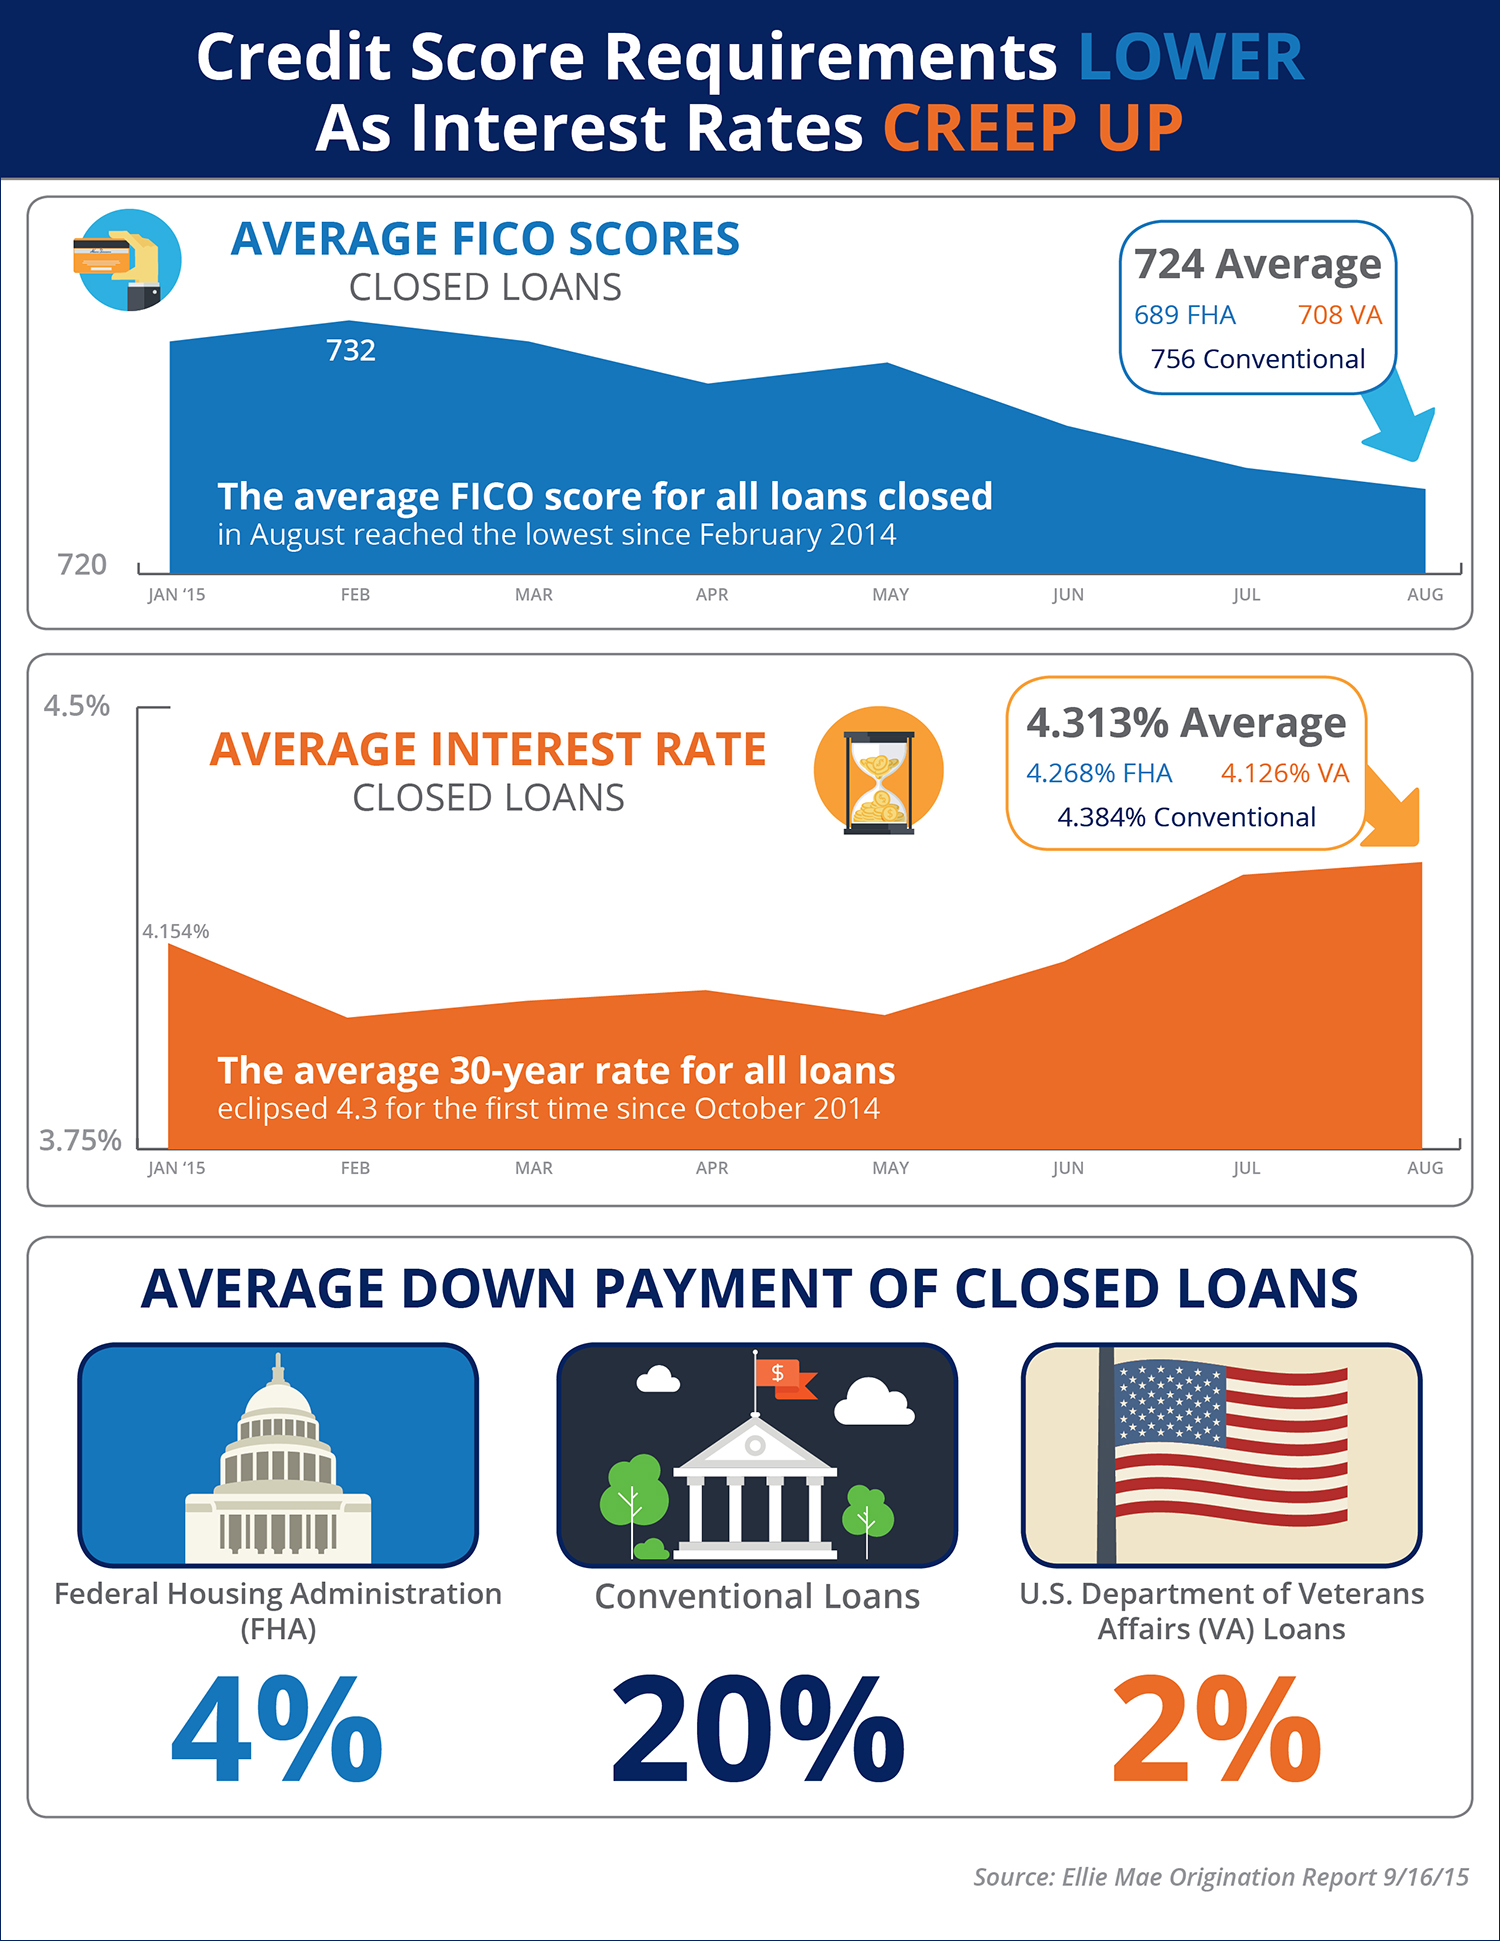 Credit Score Requirements LOWER As Interest Rates CREEP UP! [INFOGRAPHIC] | Simplifying The Market